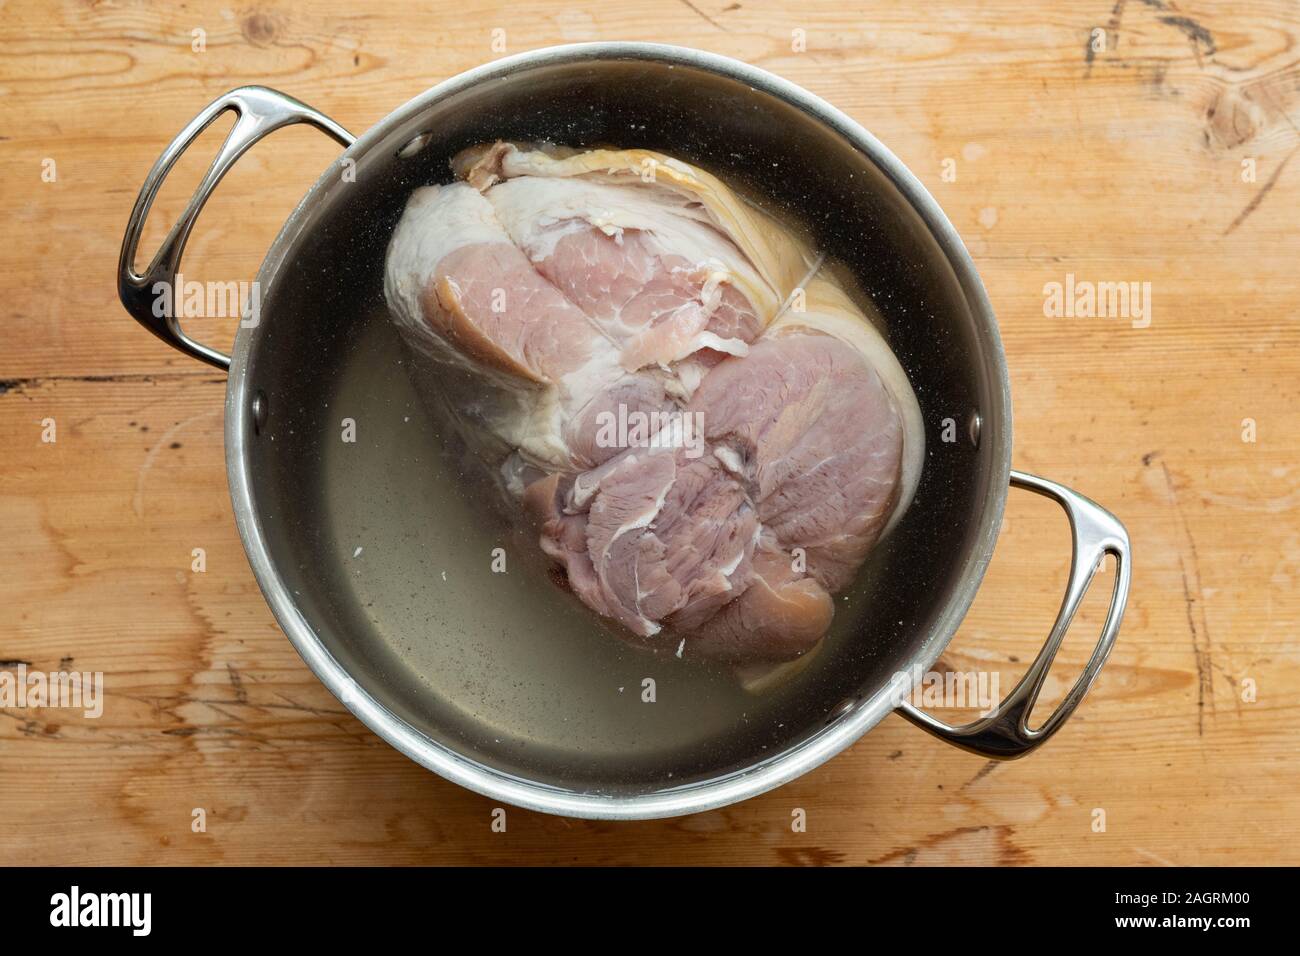 Soaking a ham joint in water to remove salt before cooking Stock Photo